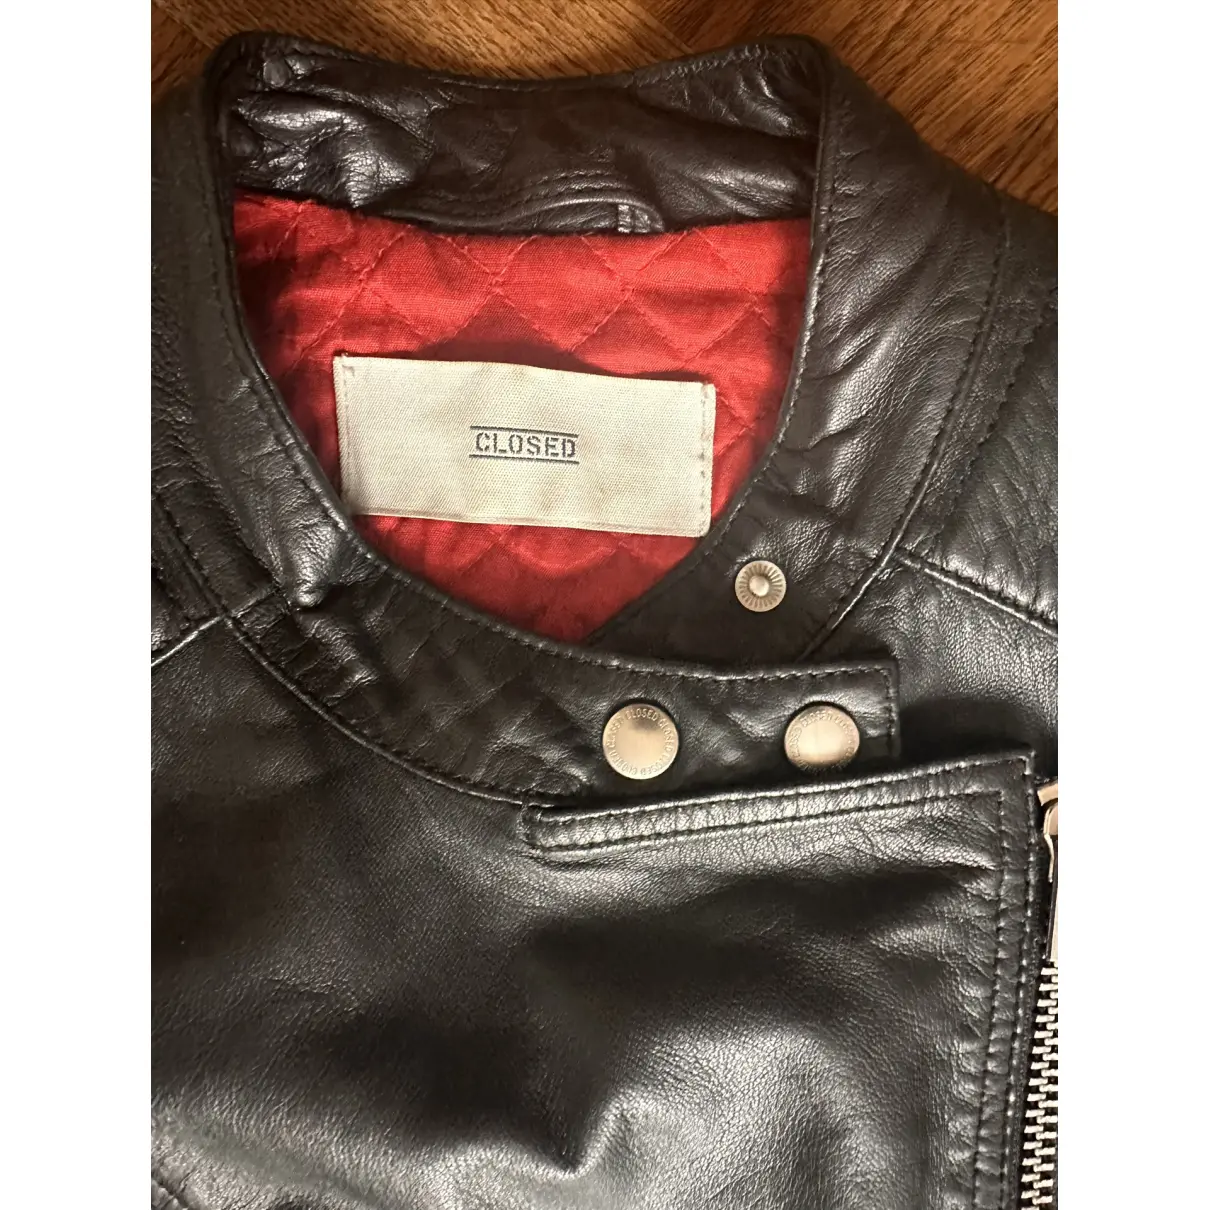 Buy Closed Leather jacket online